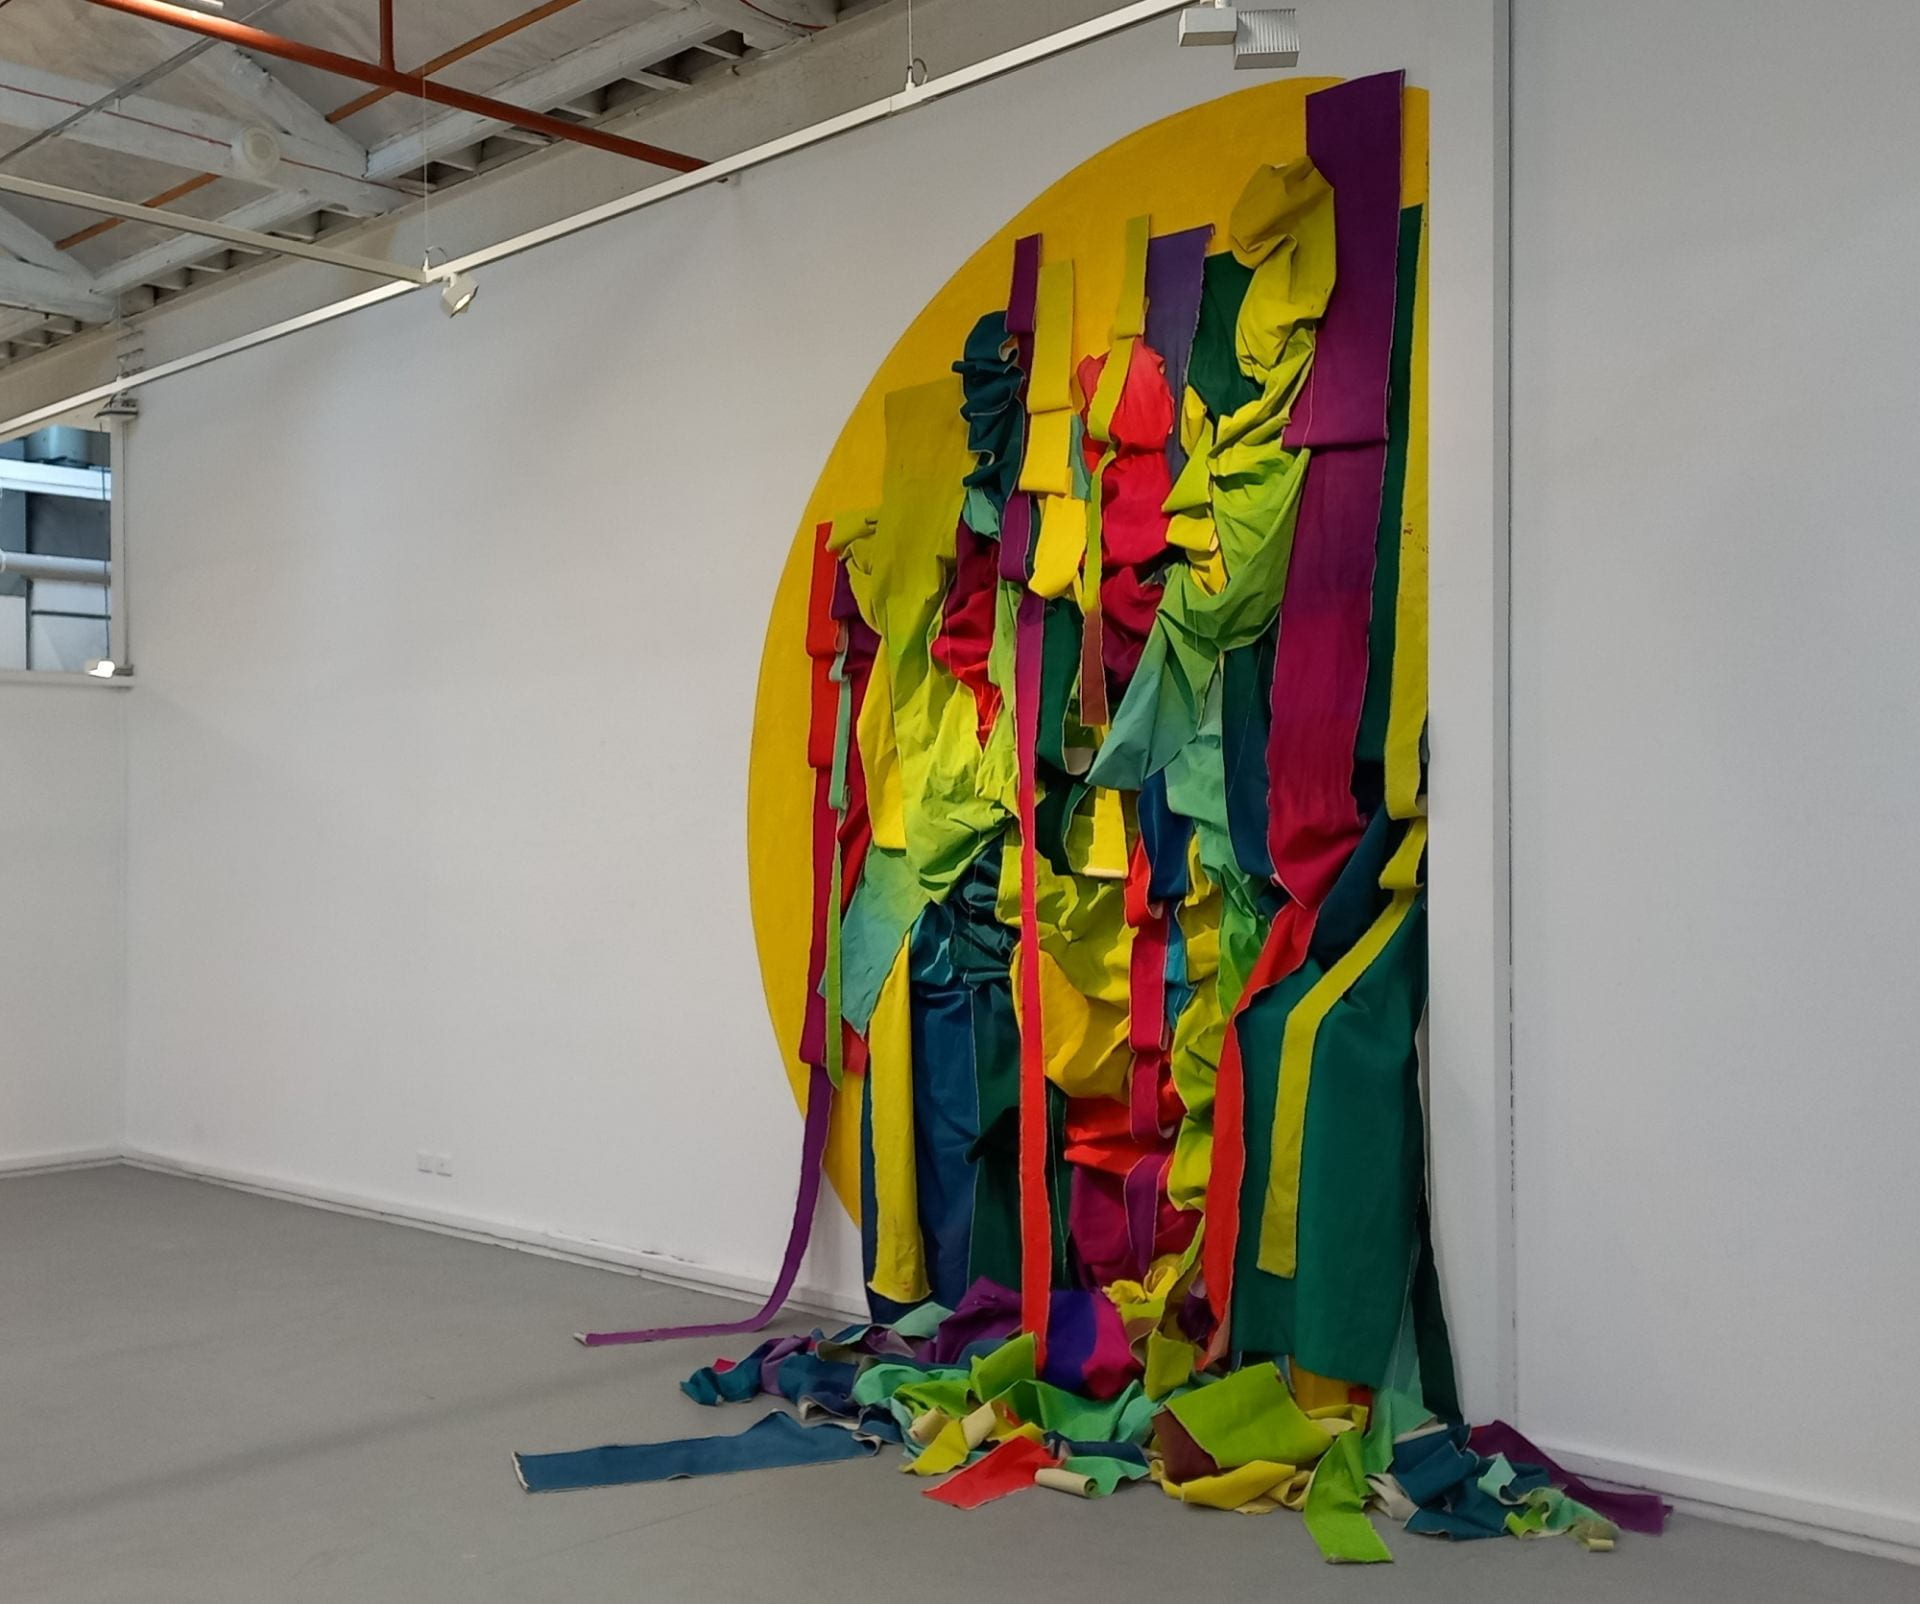 Image of an iteration of Mairin Briody's iterative painting project "The Resonance of a Tangle"